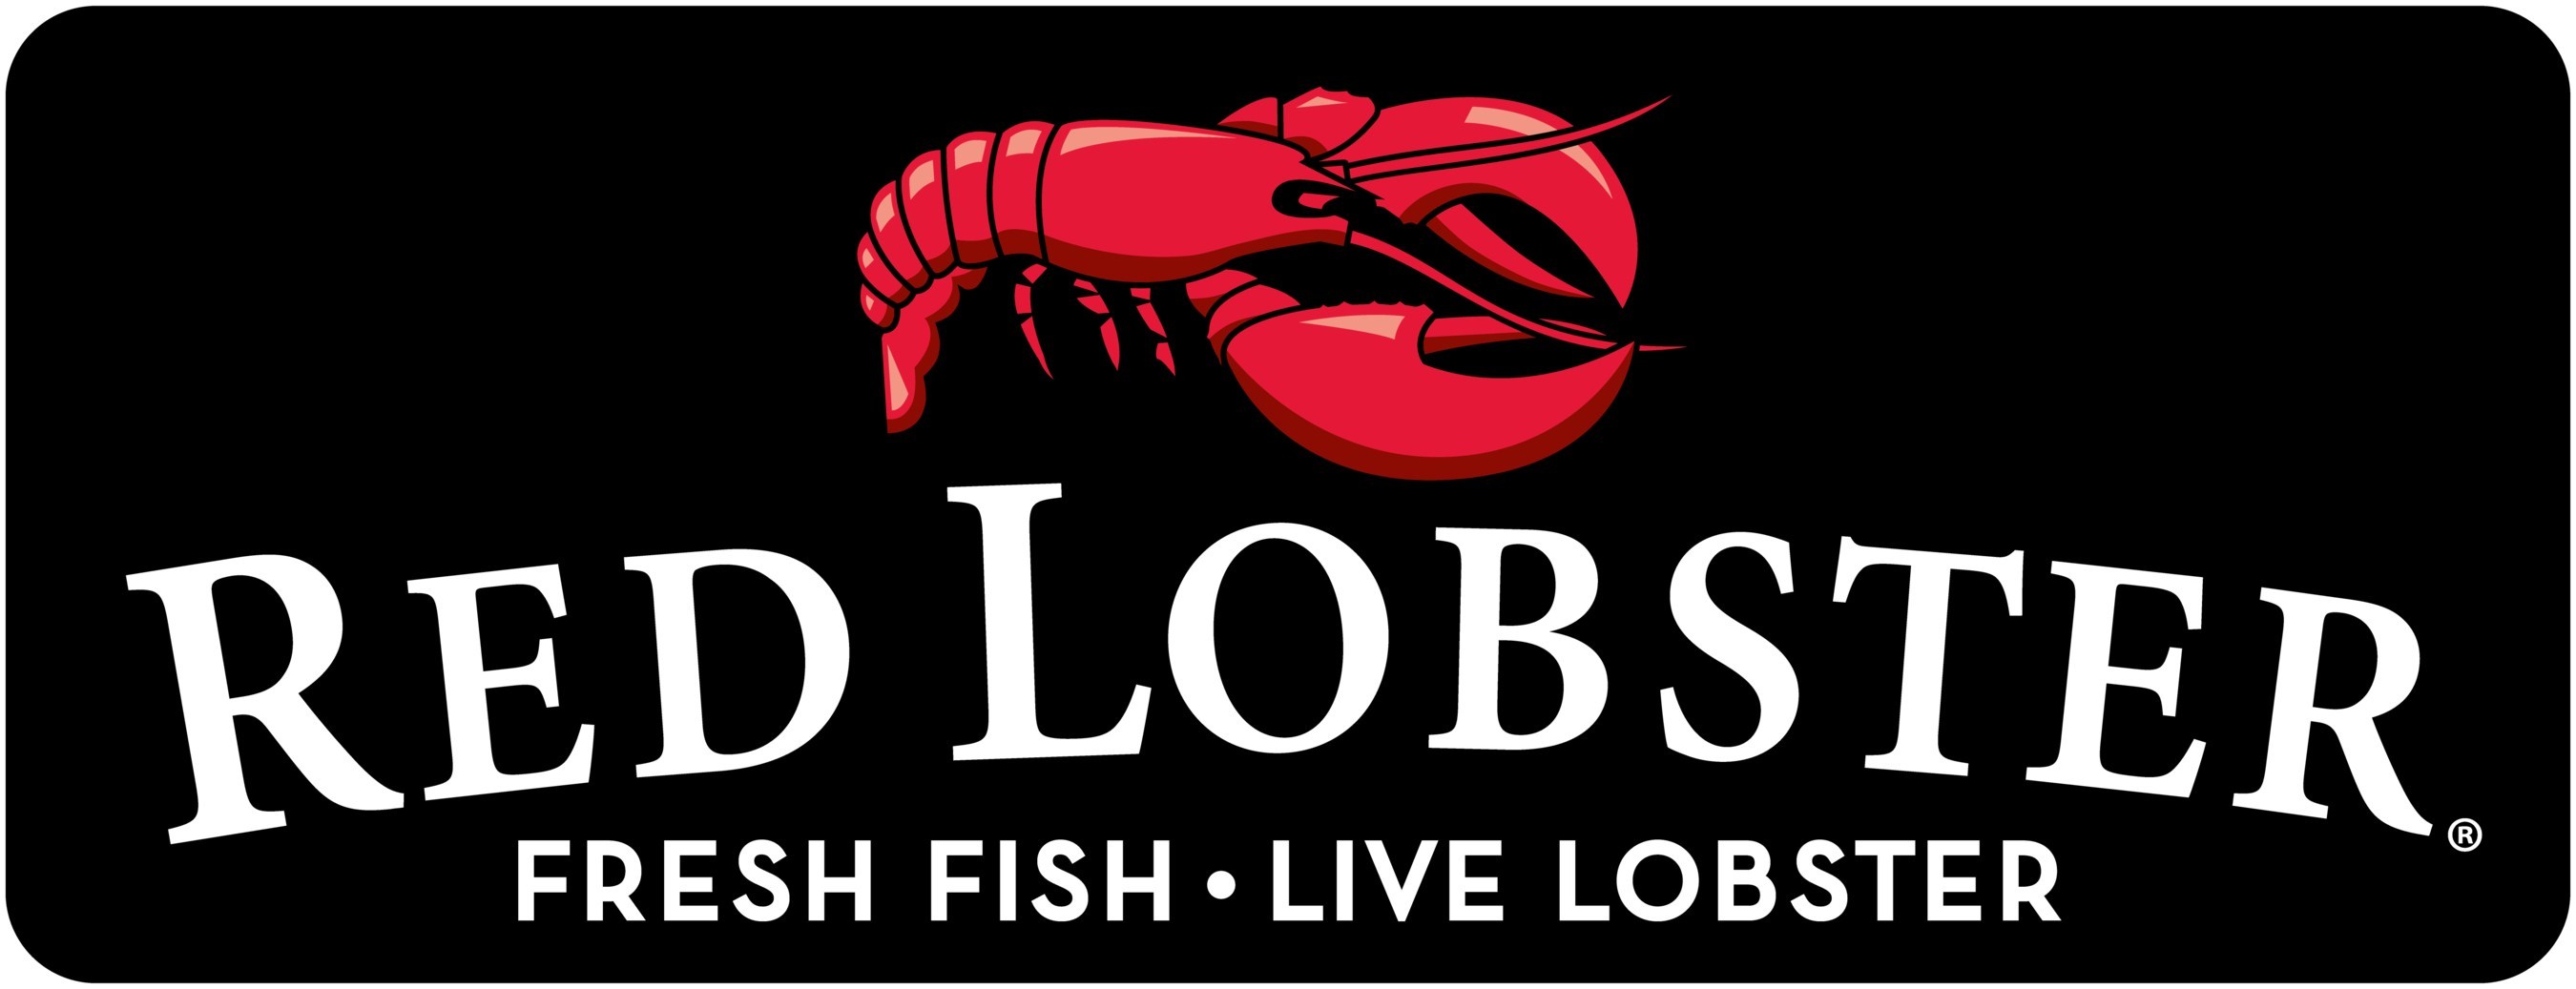 Red Lobster, Postmates Announce Delivery Partnership